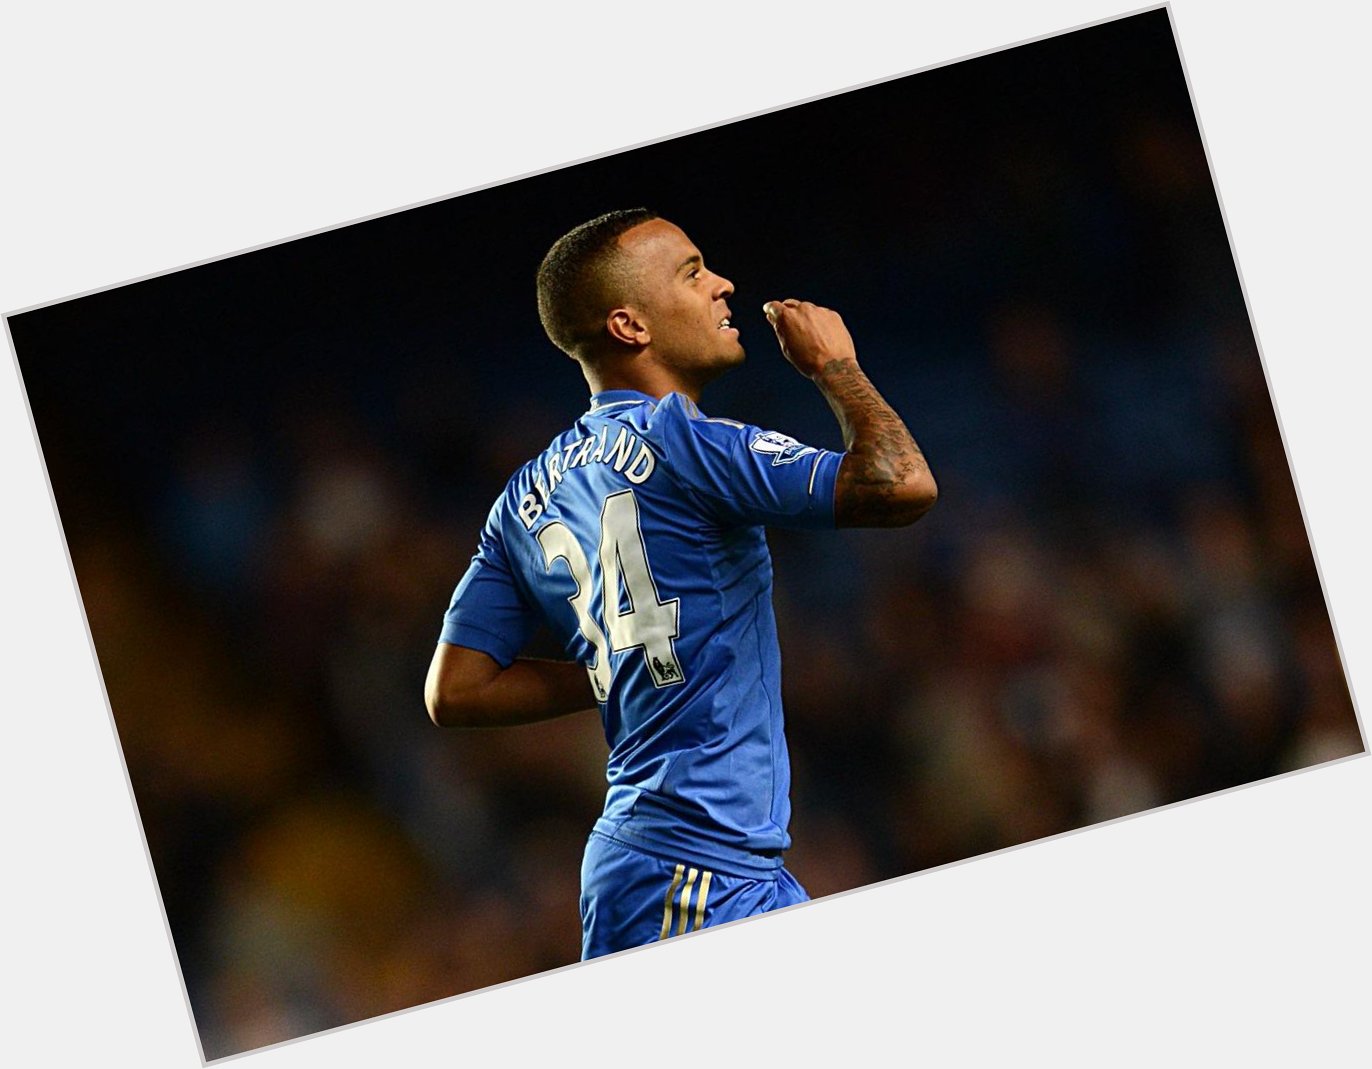 \" Also celebrating his birthday today is our former player Ryan Bertrand! birthday to you